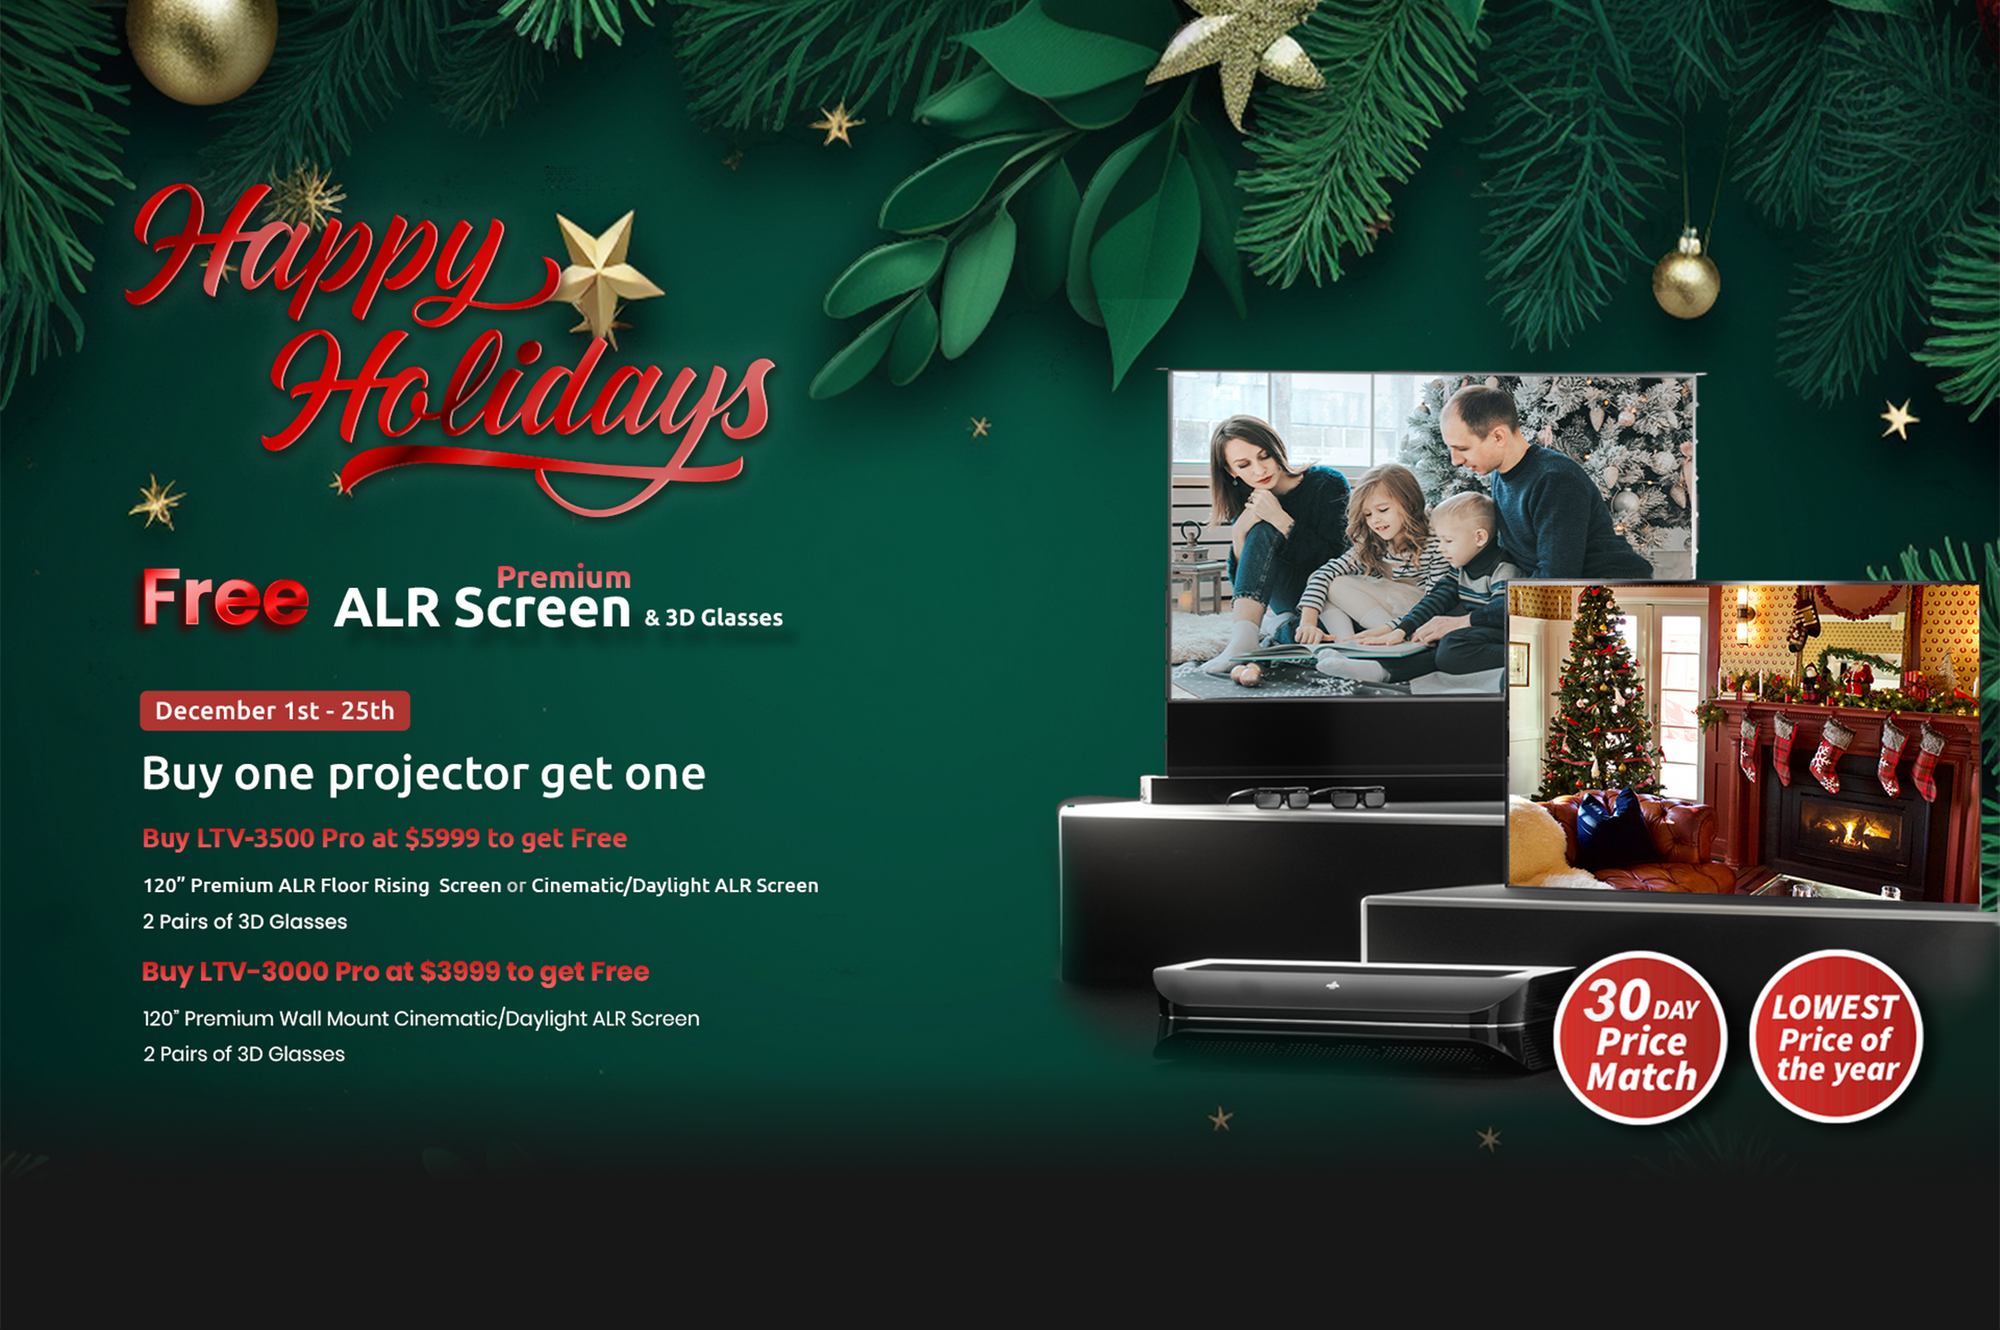 Unlock Exclusive Holiday Deals with AWOL Vision